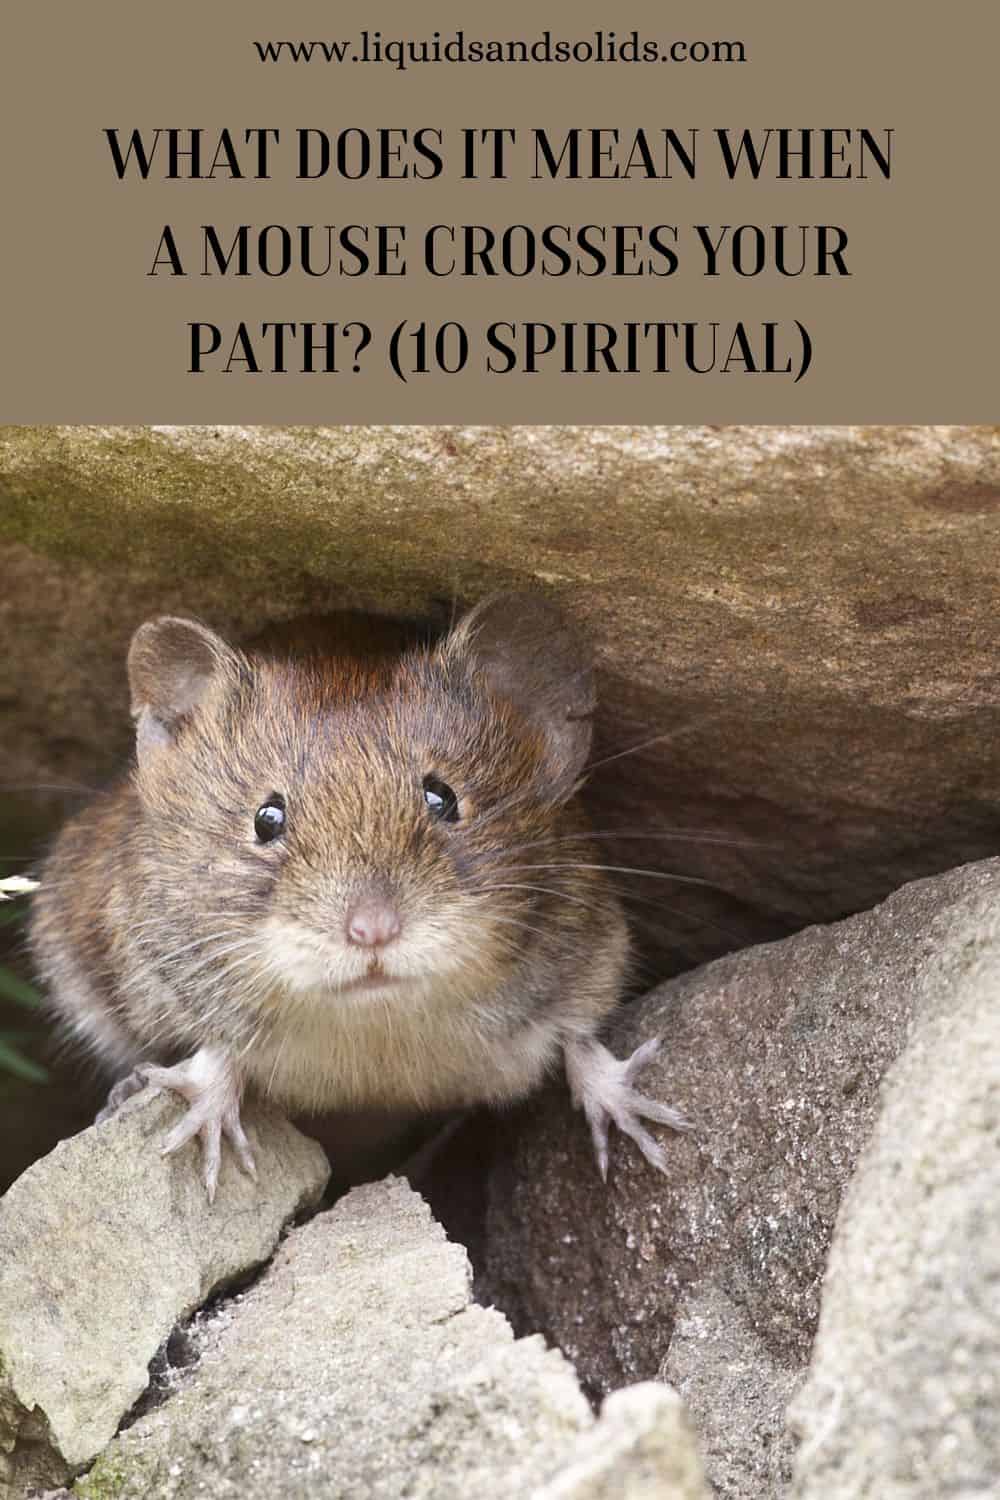 What Does It Mean When A Mouse Crosses Your Path? (10 Spiritual)